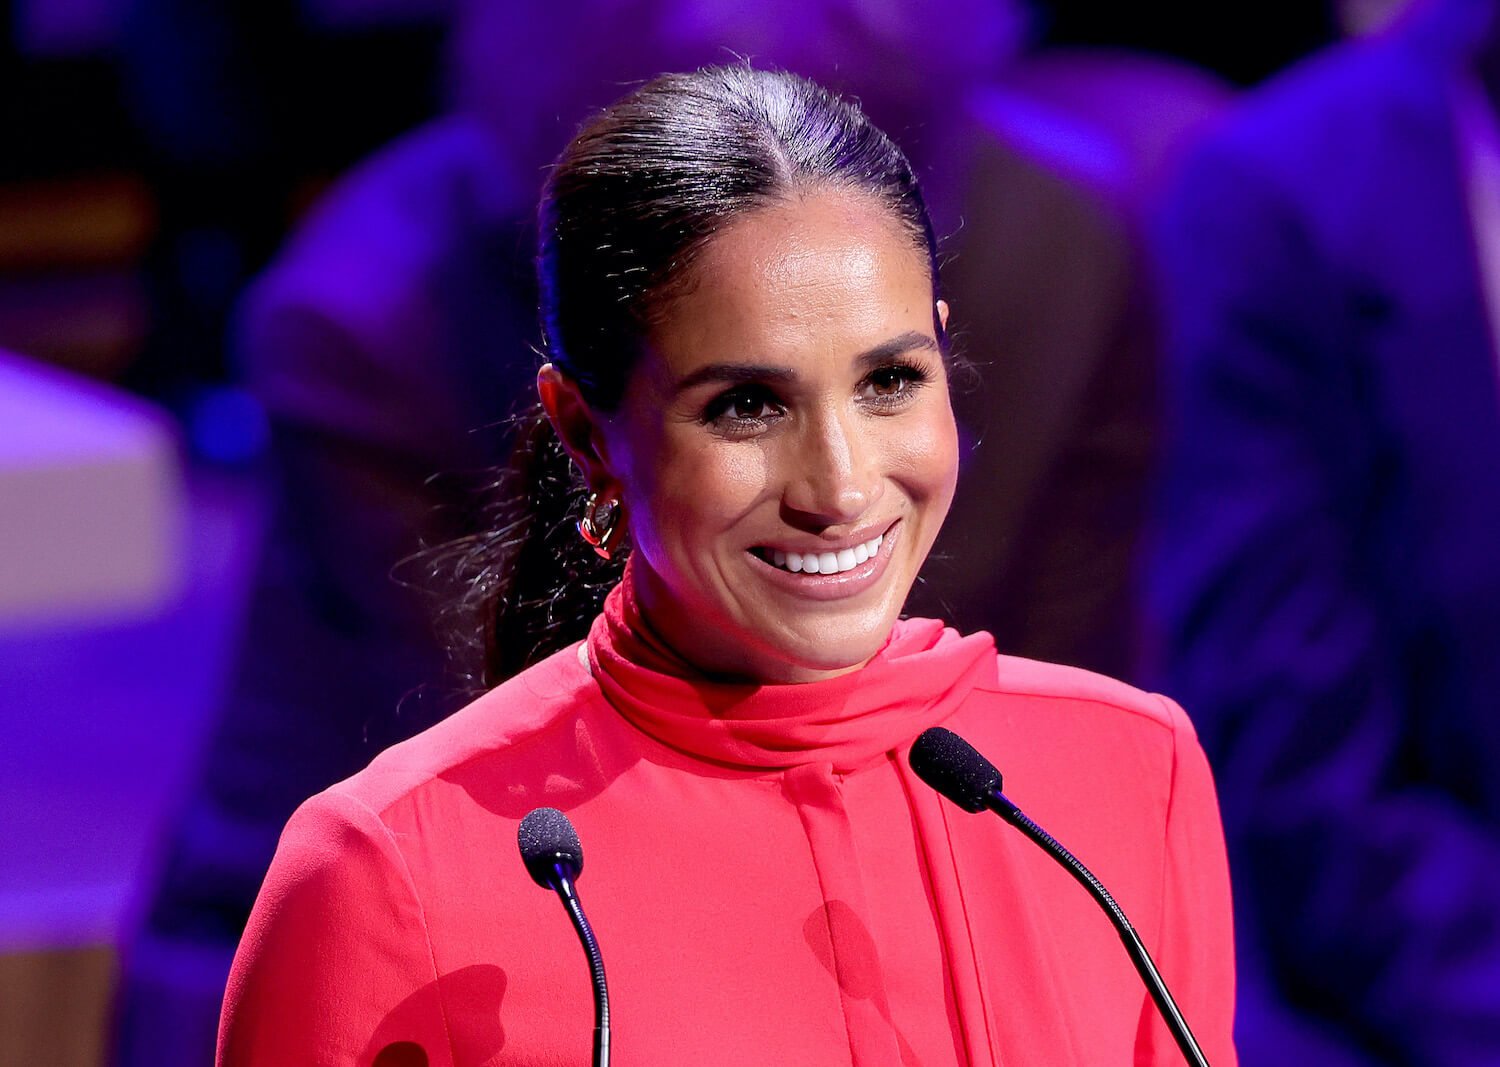 Meghan Markle wears a red top and smiles with her hair pulled back